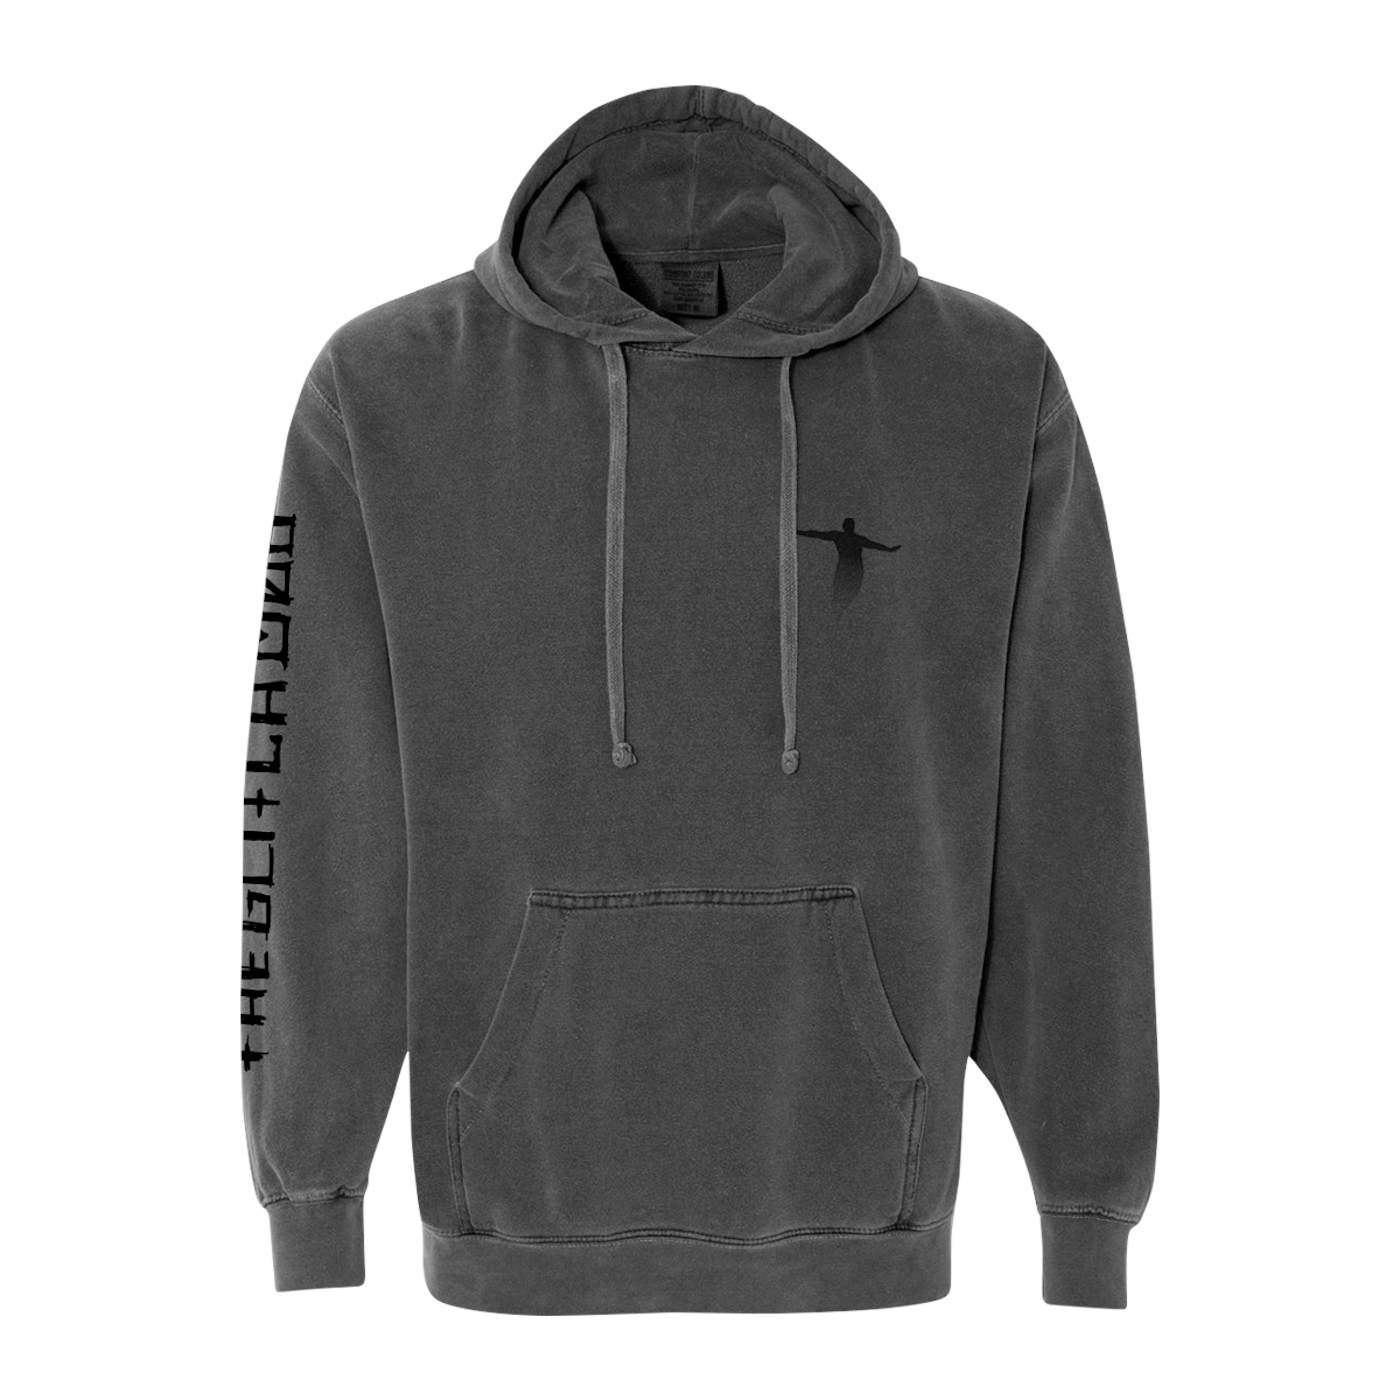 The Glitch Mob SACRED PULLOVER HOODIE